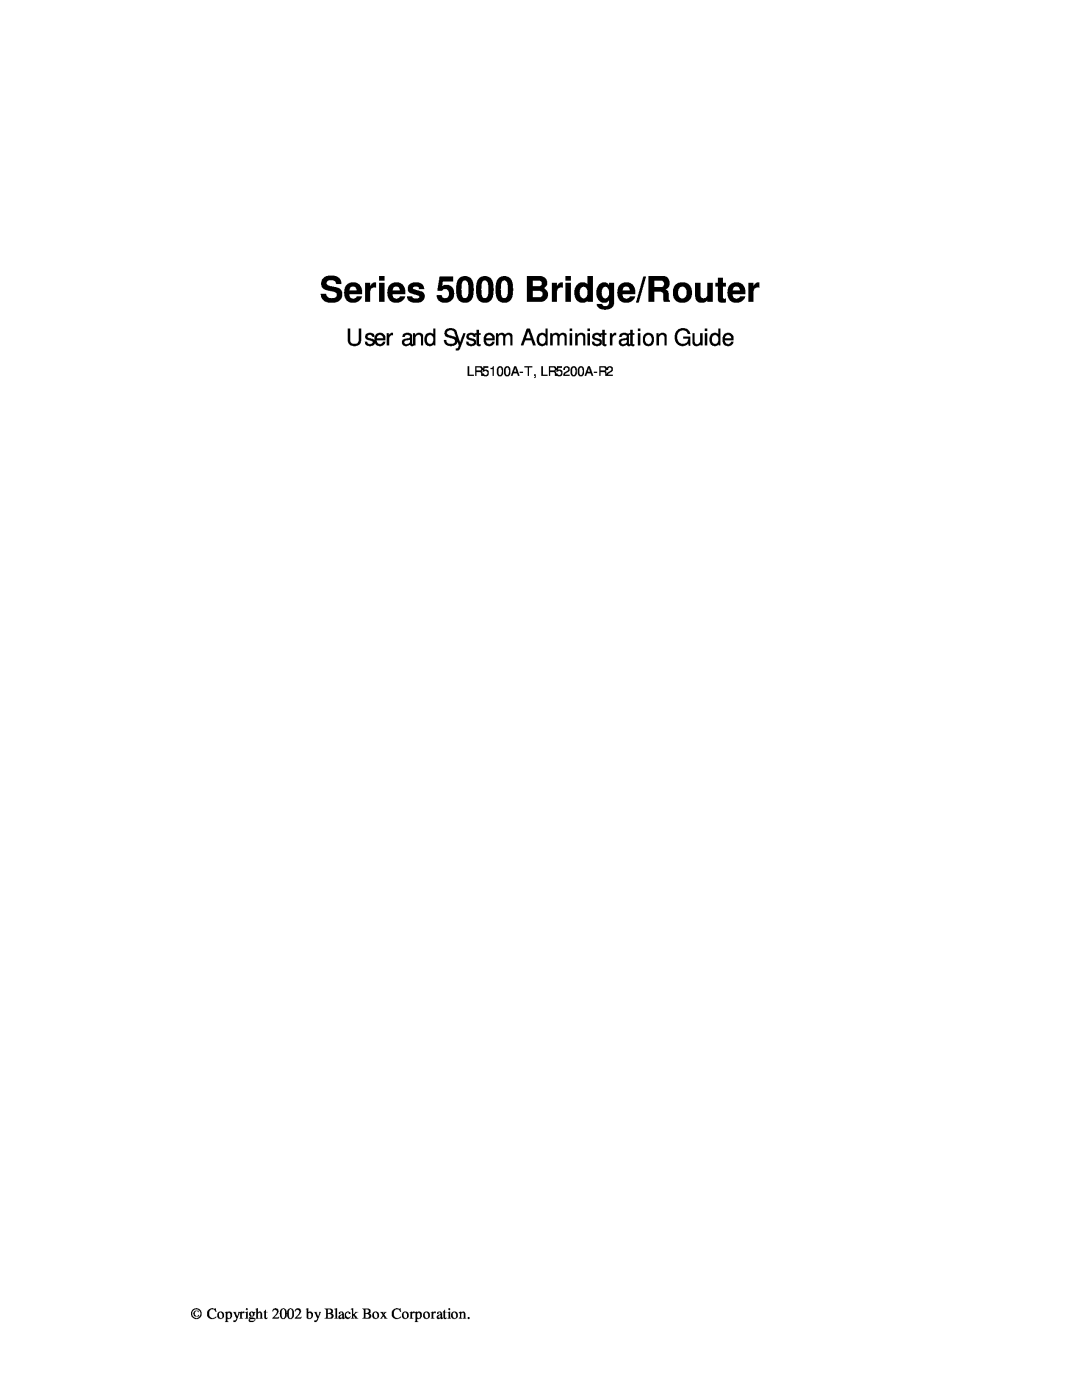 Black Box manual User and System Administration Guide, Series 5000 Bridge/Router, LR5100A-T, LR5200A-R2 